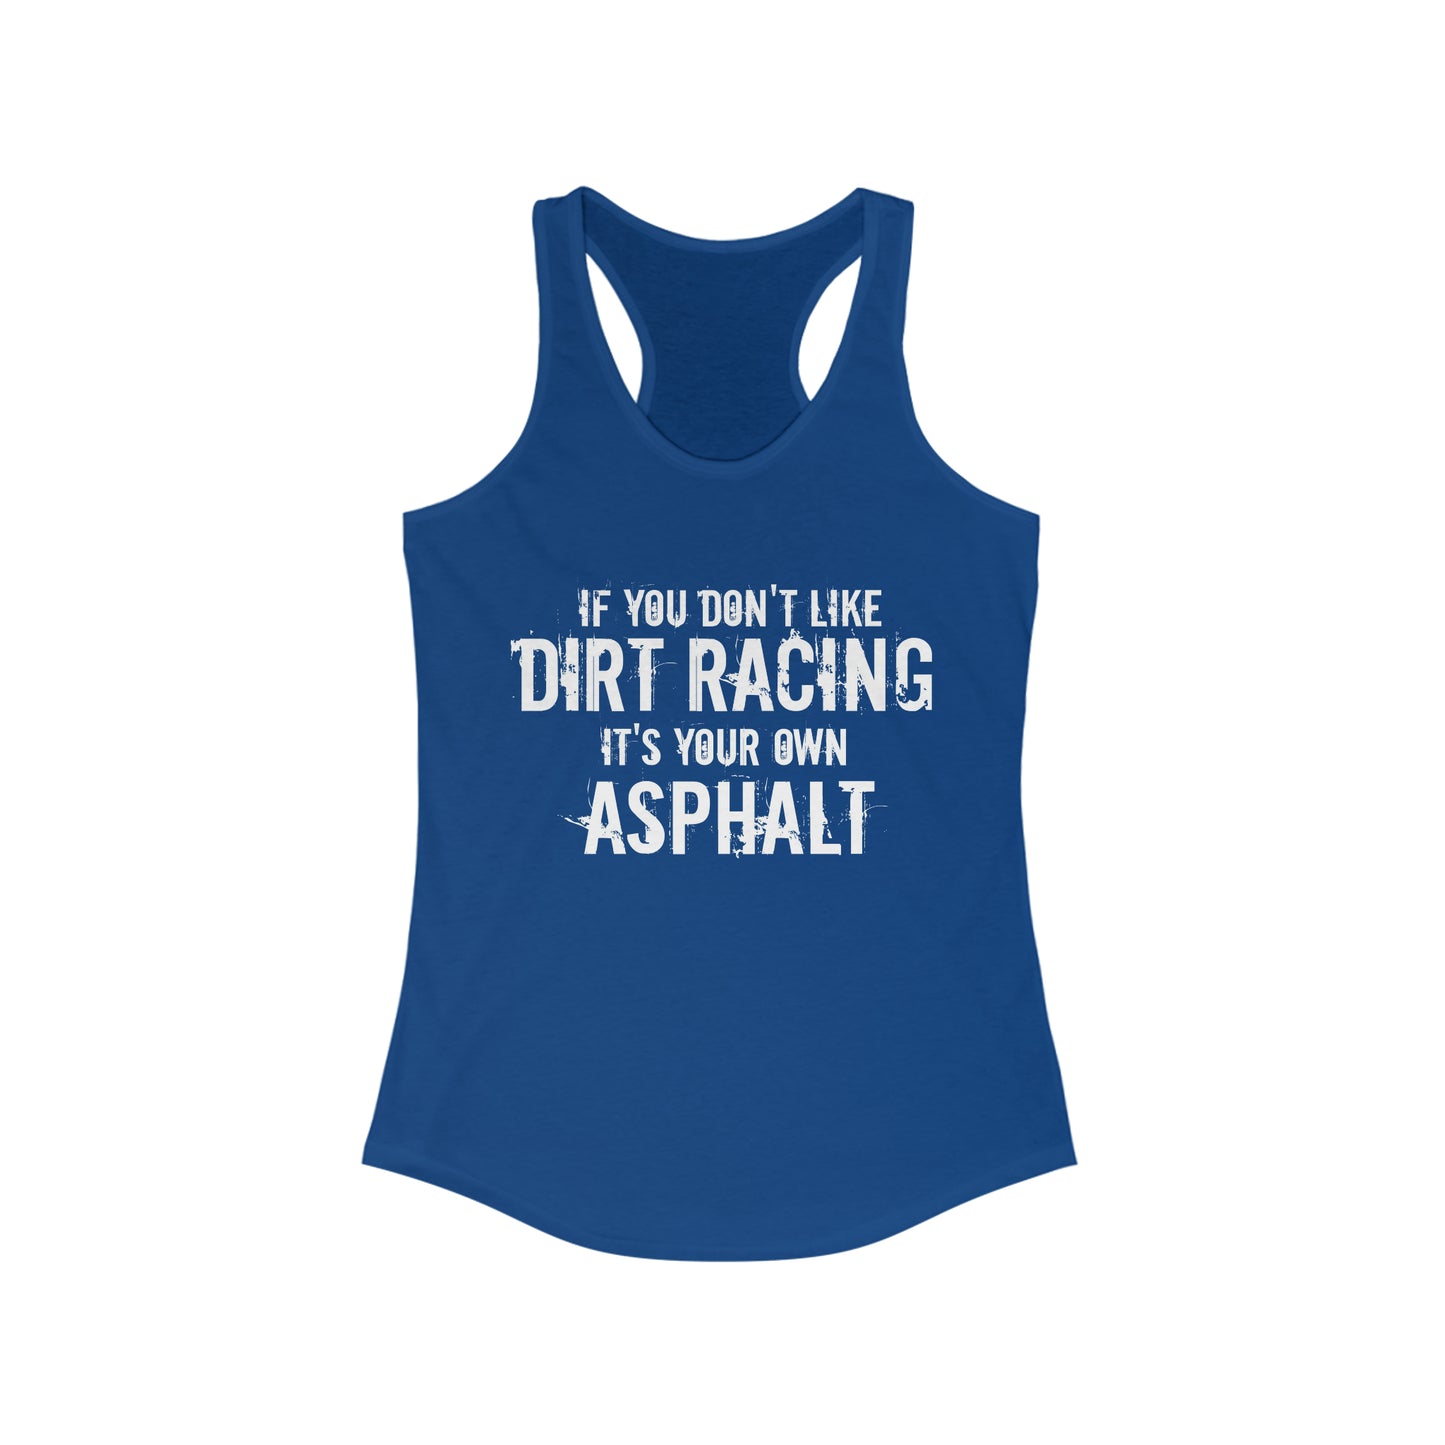 If You Don't Like Dirt Racing It's Your Own Asphalt Racerback Tank